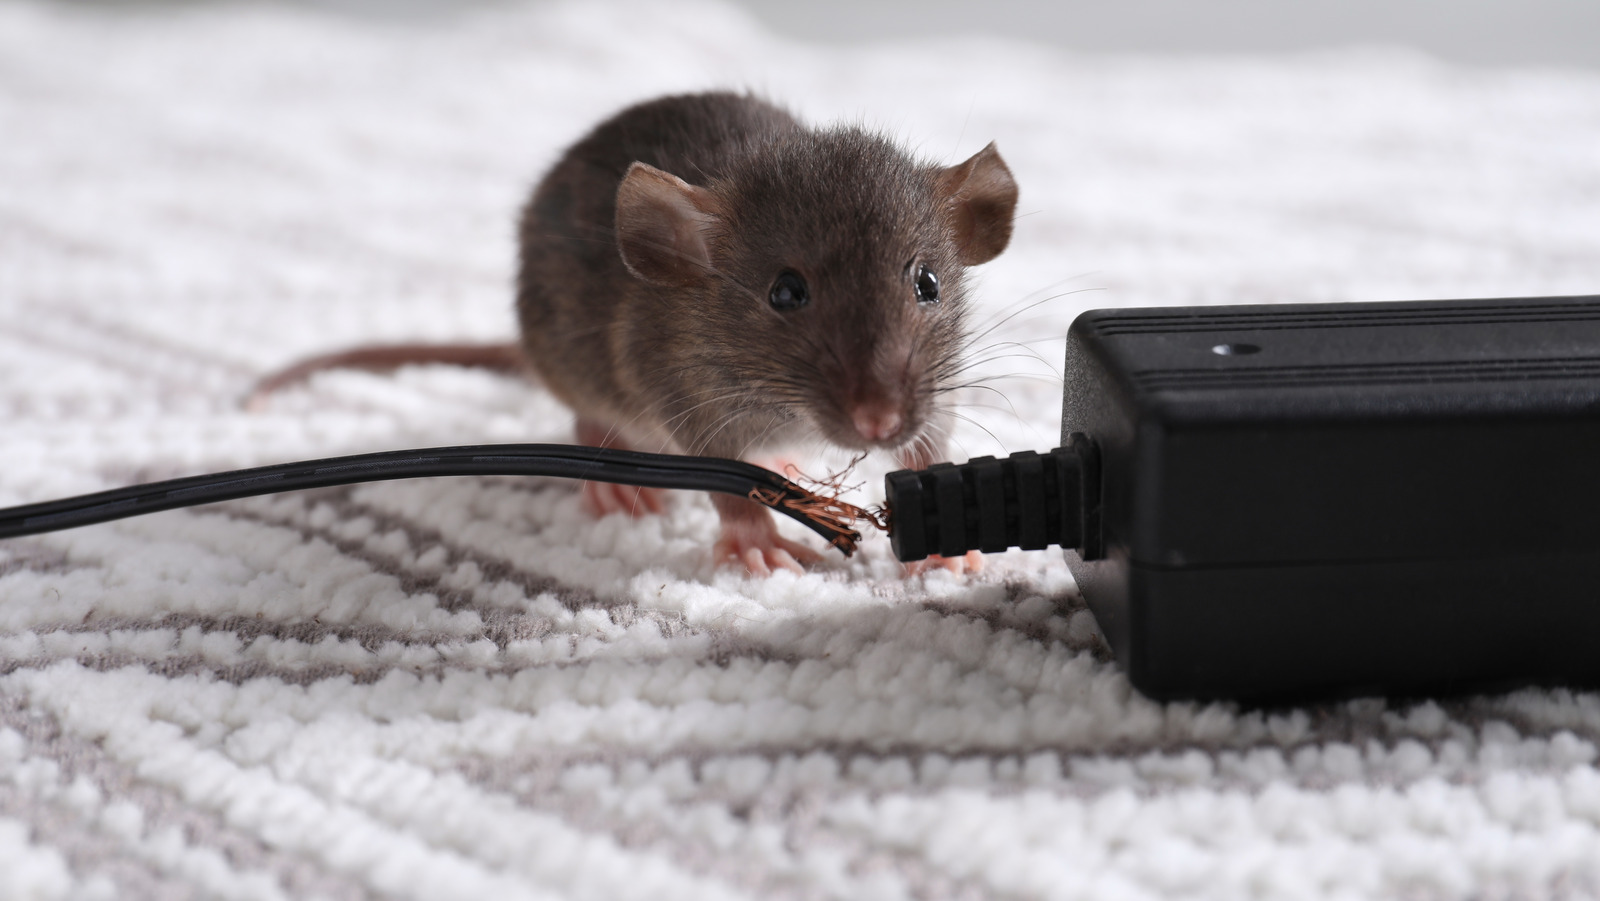 A Common Kitchen Ingredient Is All You Need To Keep Mice Out Of